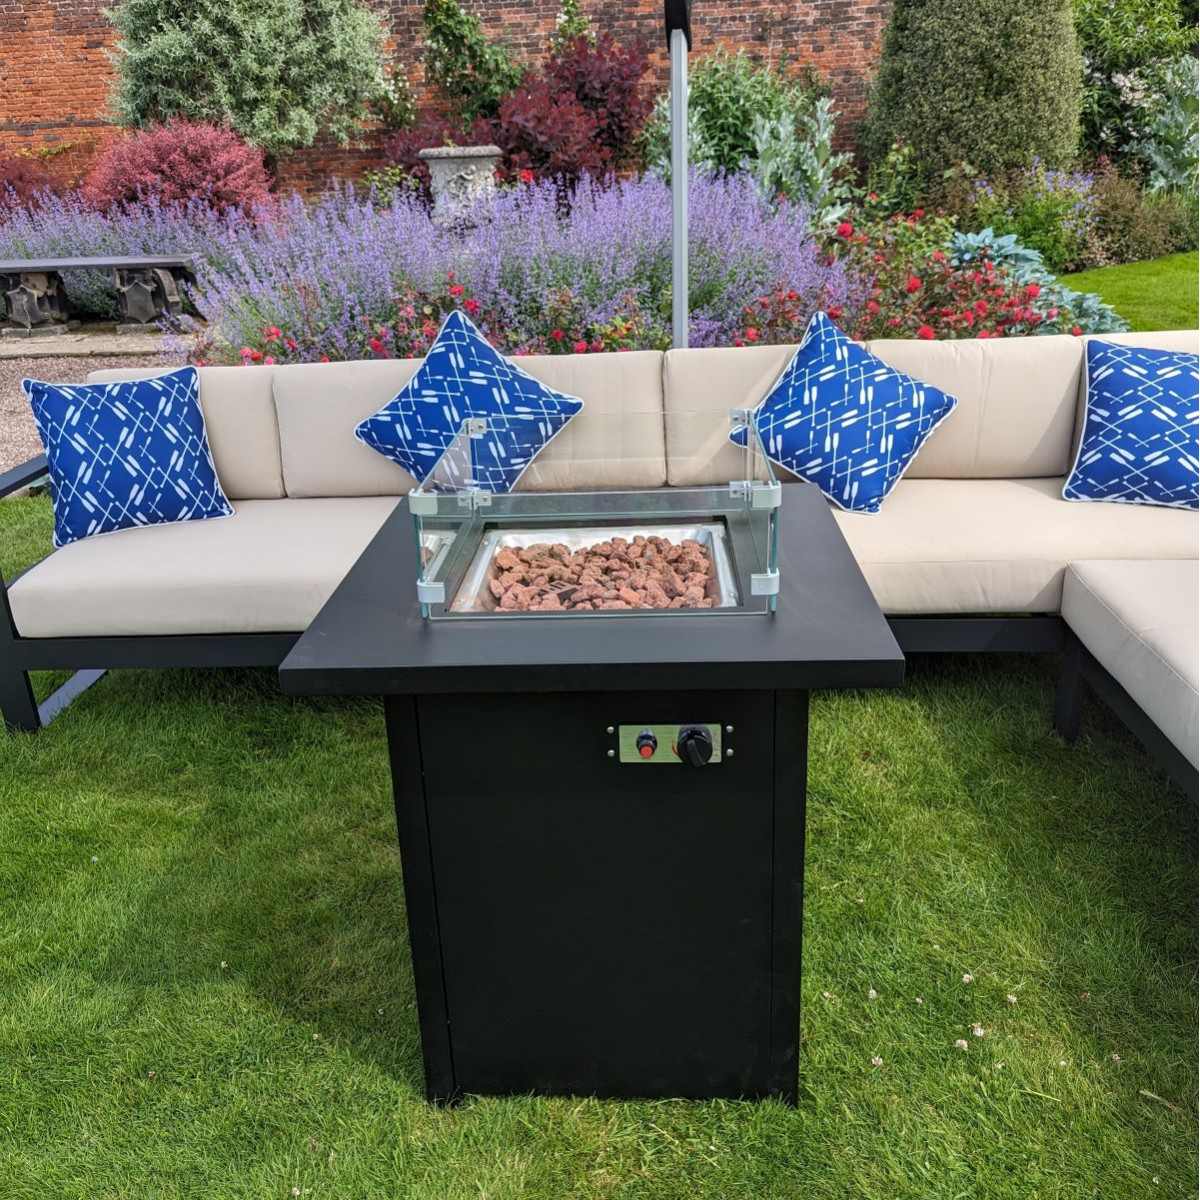 L-Shaped Sofa With Gas Fire Pit Table.  